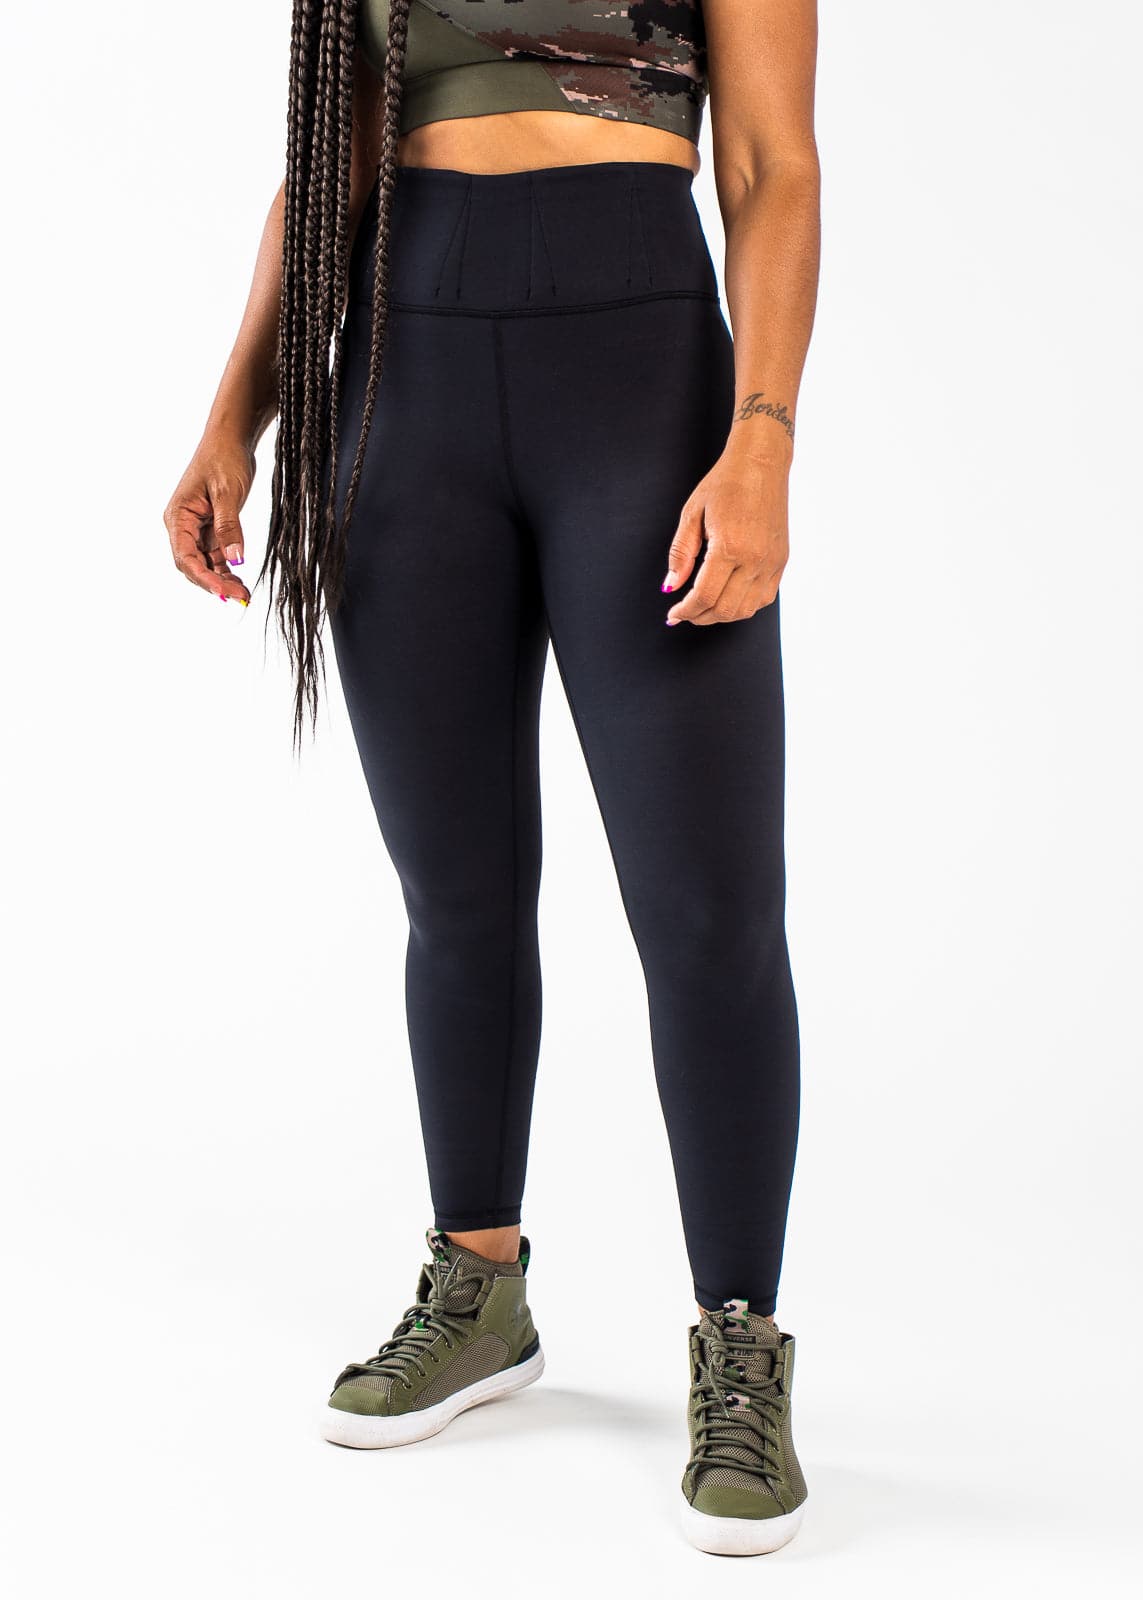 Shoulders Down Front View with Hands at Side - Concealed Carry Leggings Without Pockets | Black